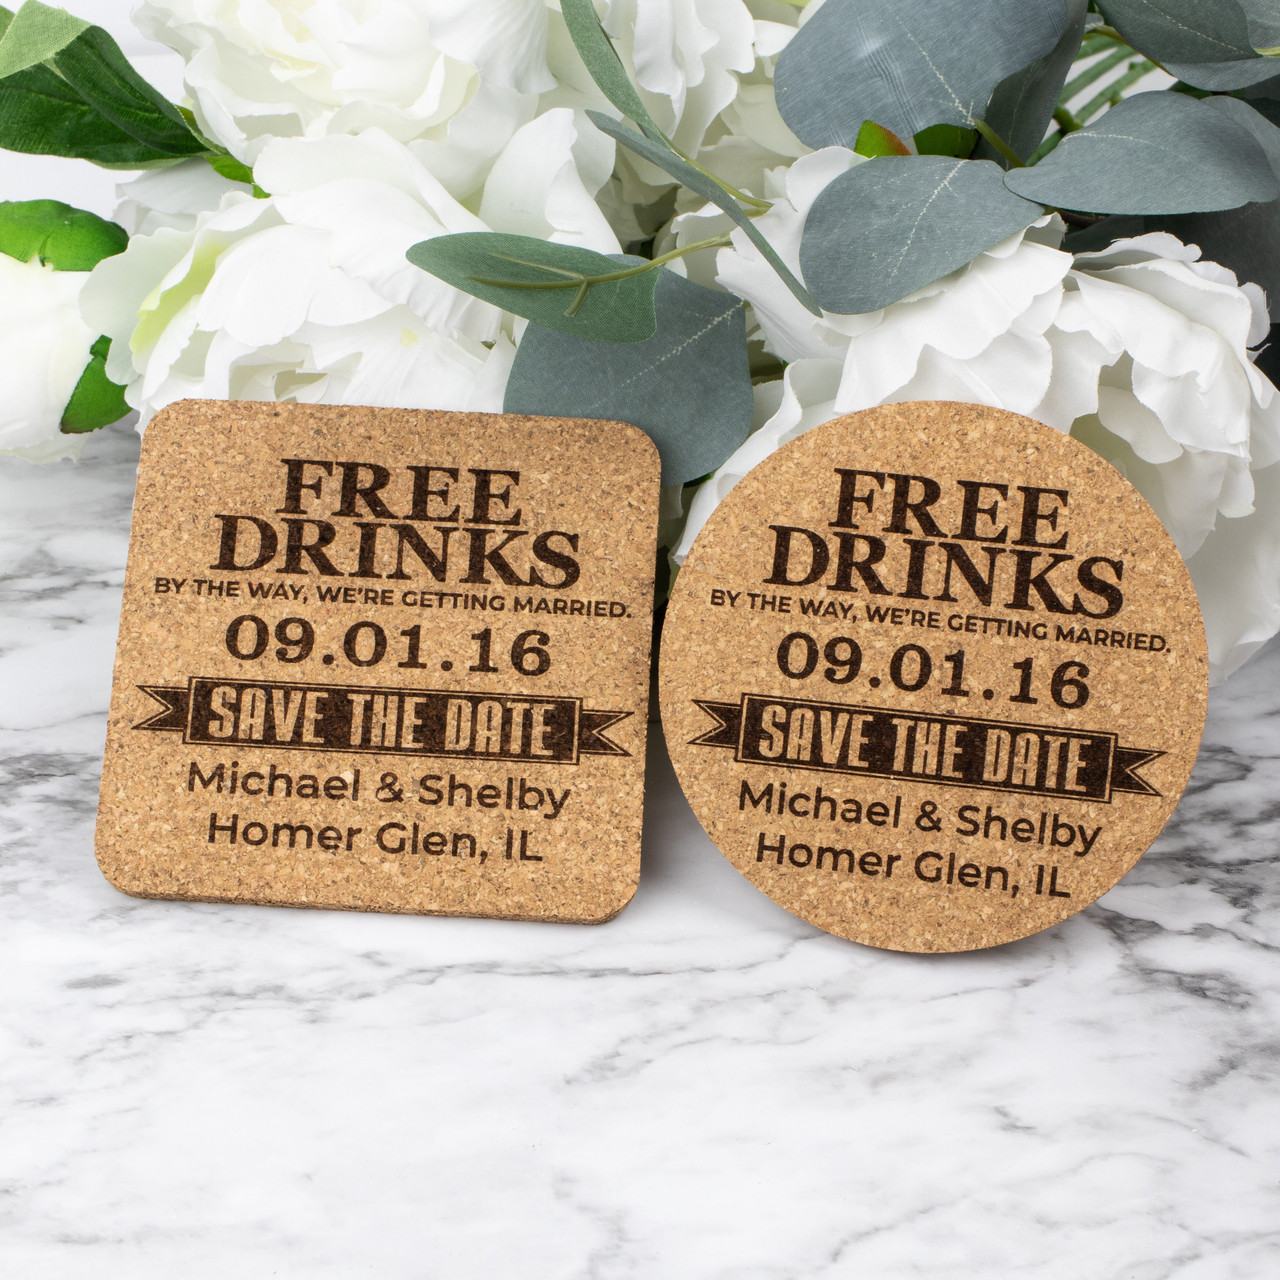 Free Drinks Save The Date Cork Coasters